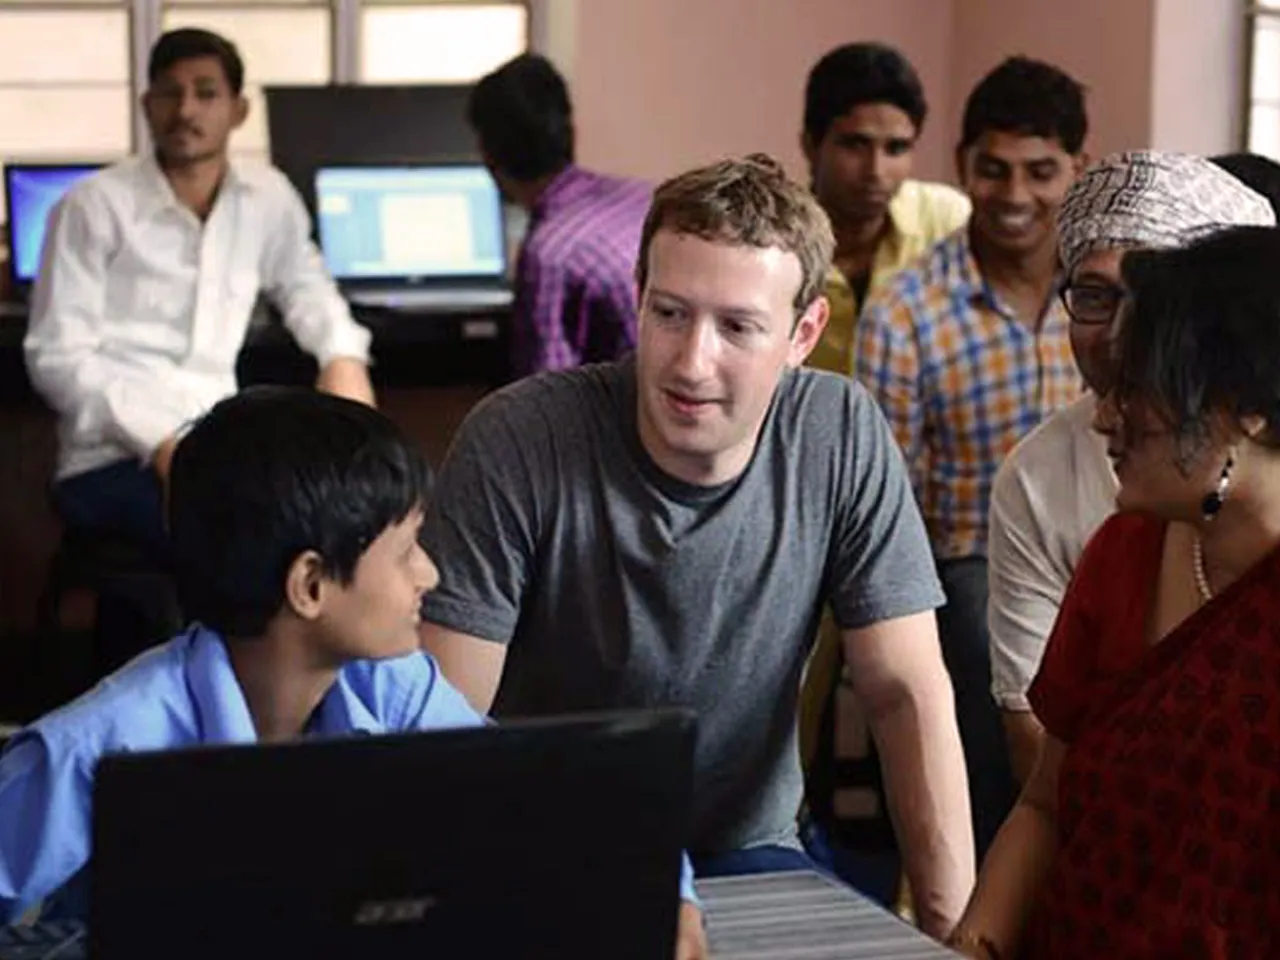 Mark Zuckerberg's next townhall Q & A to happen in India